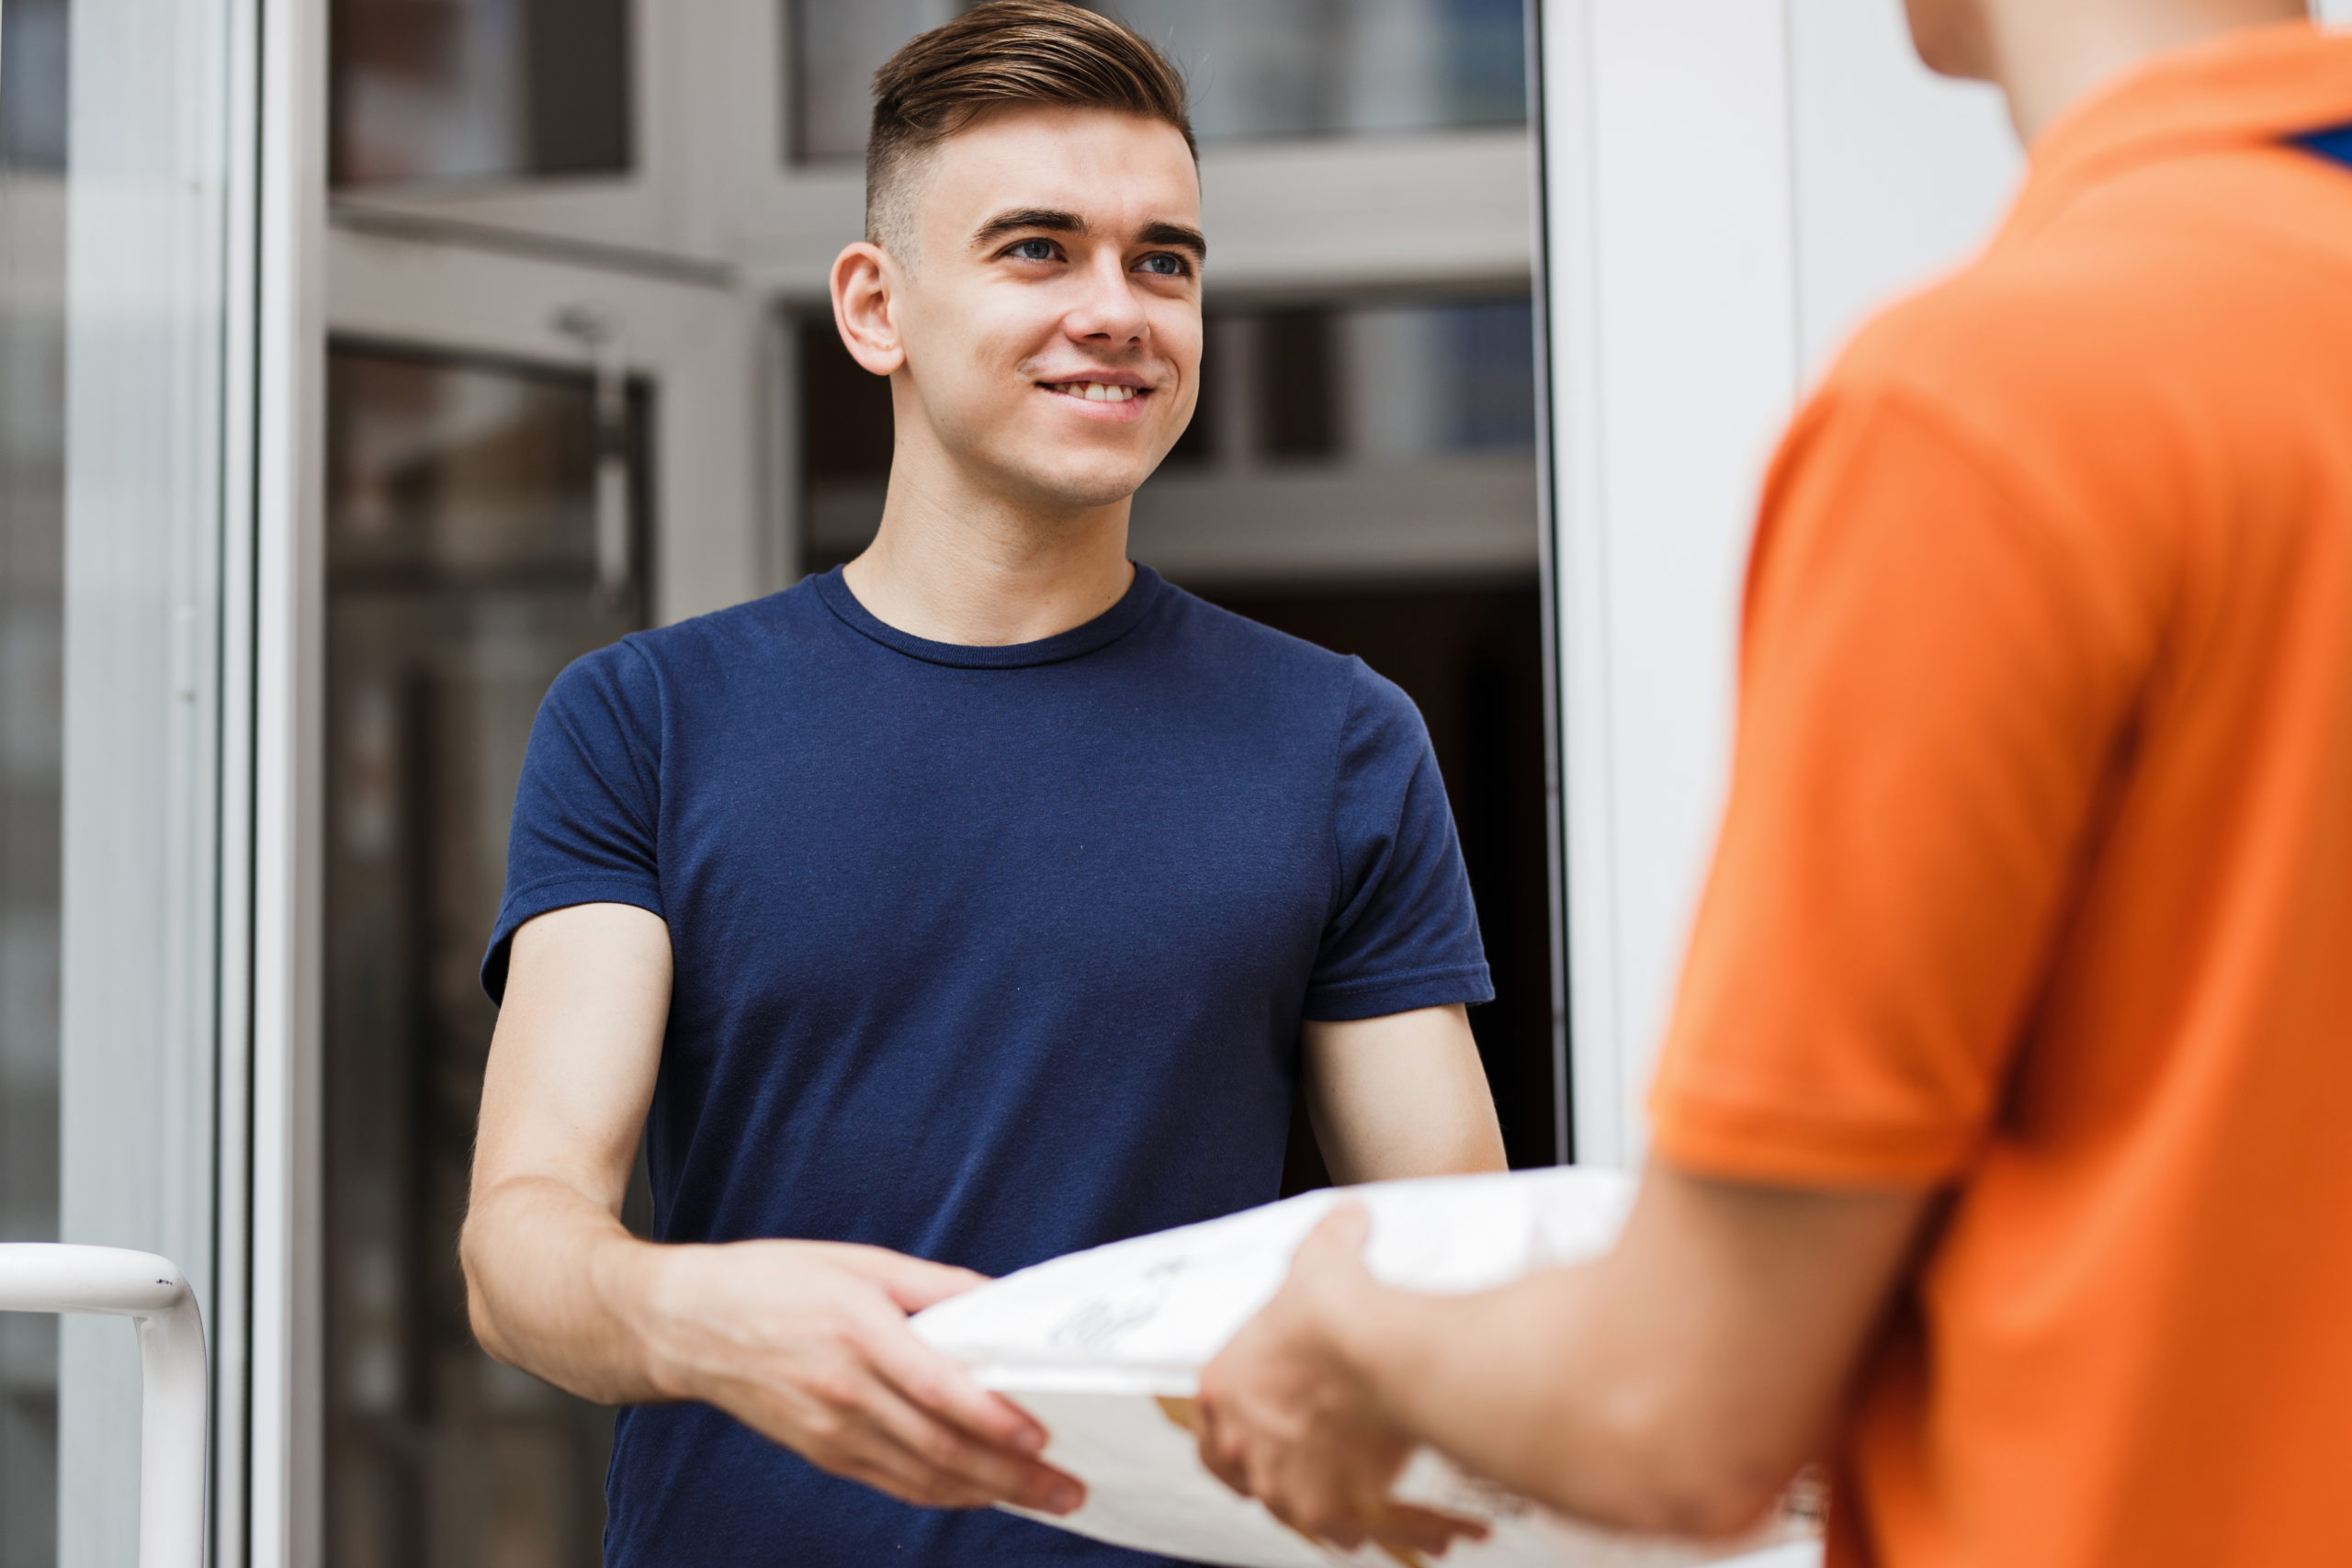 A person wearing an orange T-shirt is delivering a parcel to a satisfied client. Friendly worker, high quality delivery service